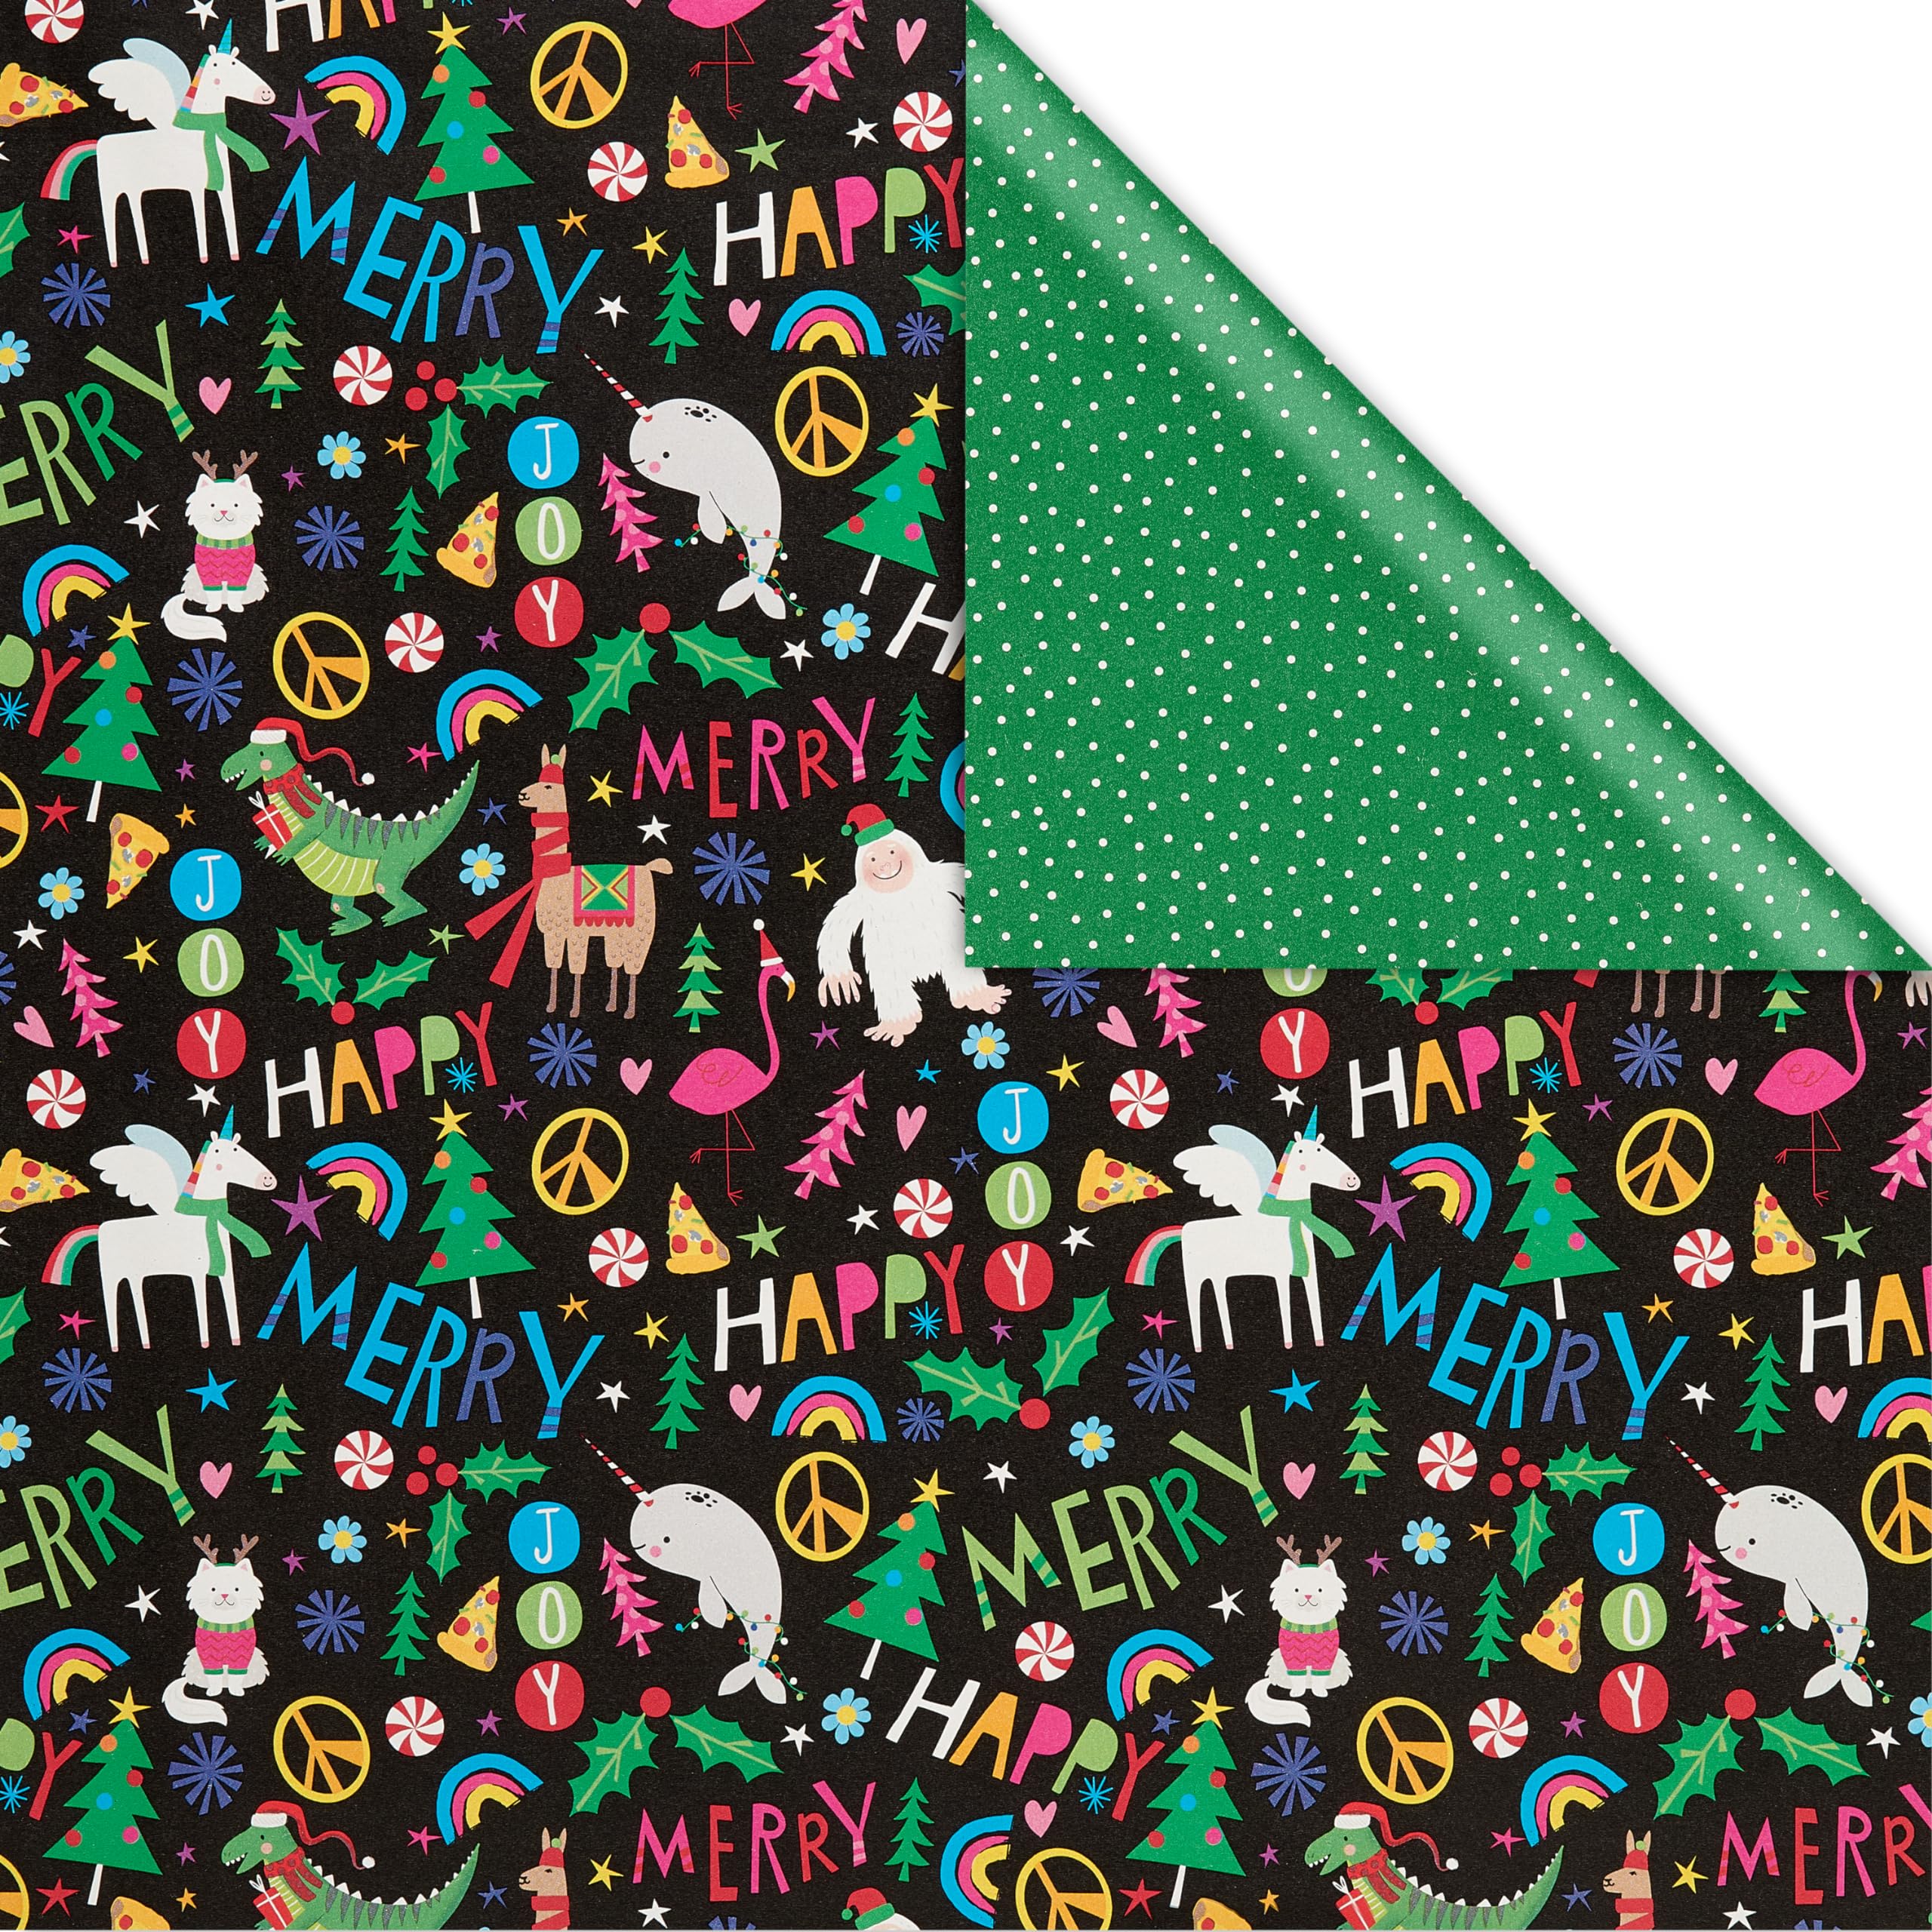 American Greetings 175 sq. ft. Reversible Black Christmas Wrapping Paper For Kids, Dinosaurs, Yetis and Unicorns (1 Jumbo Roll 30 in. x 70 ft.)